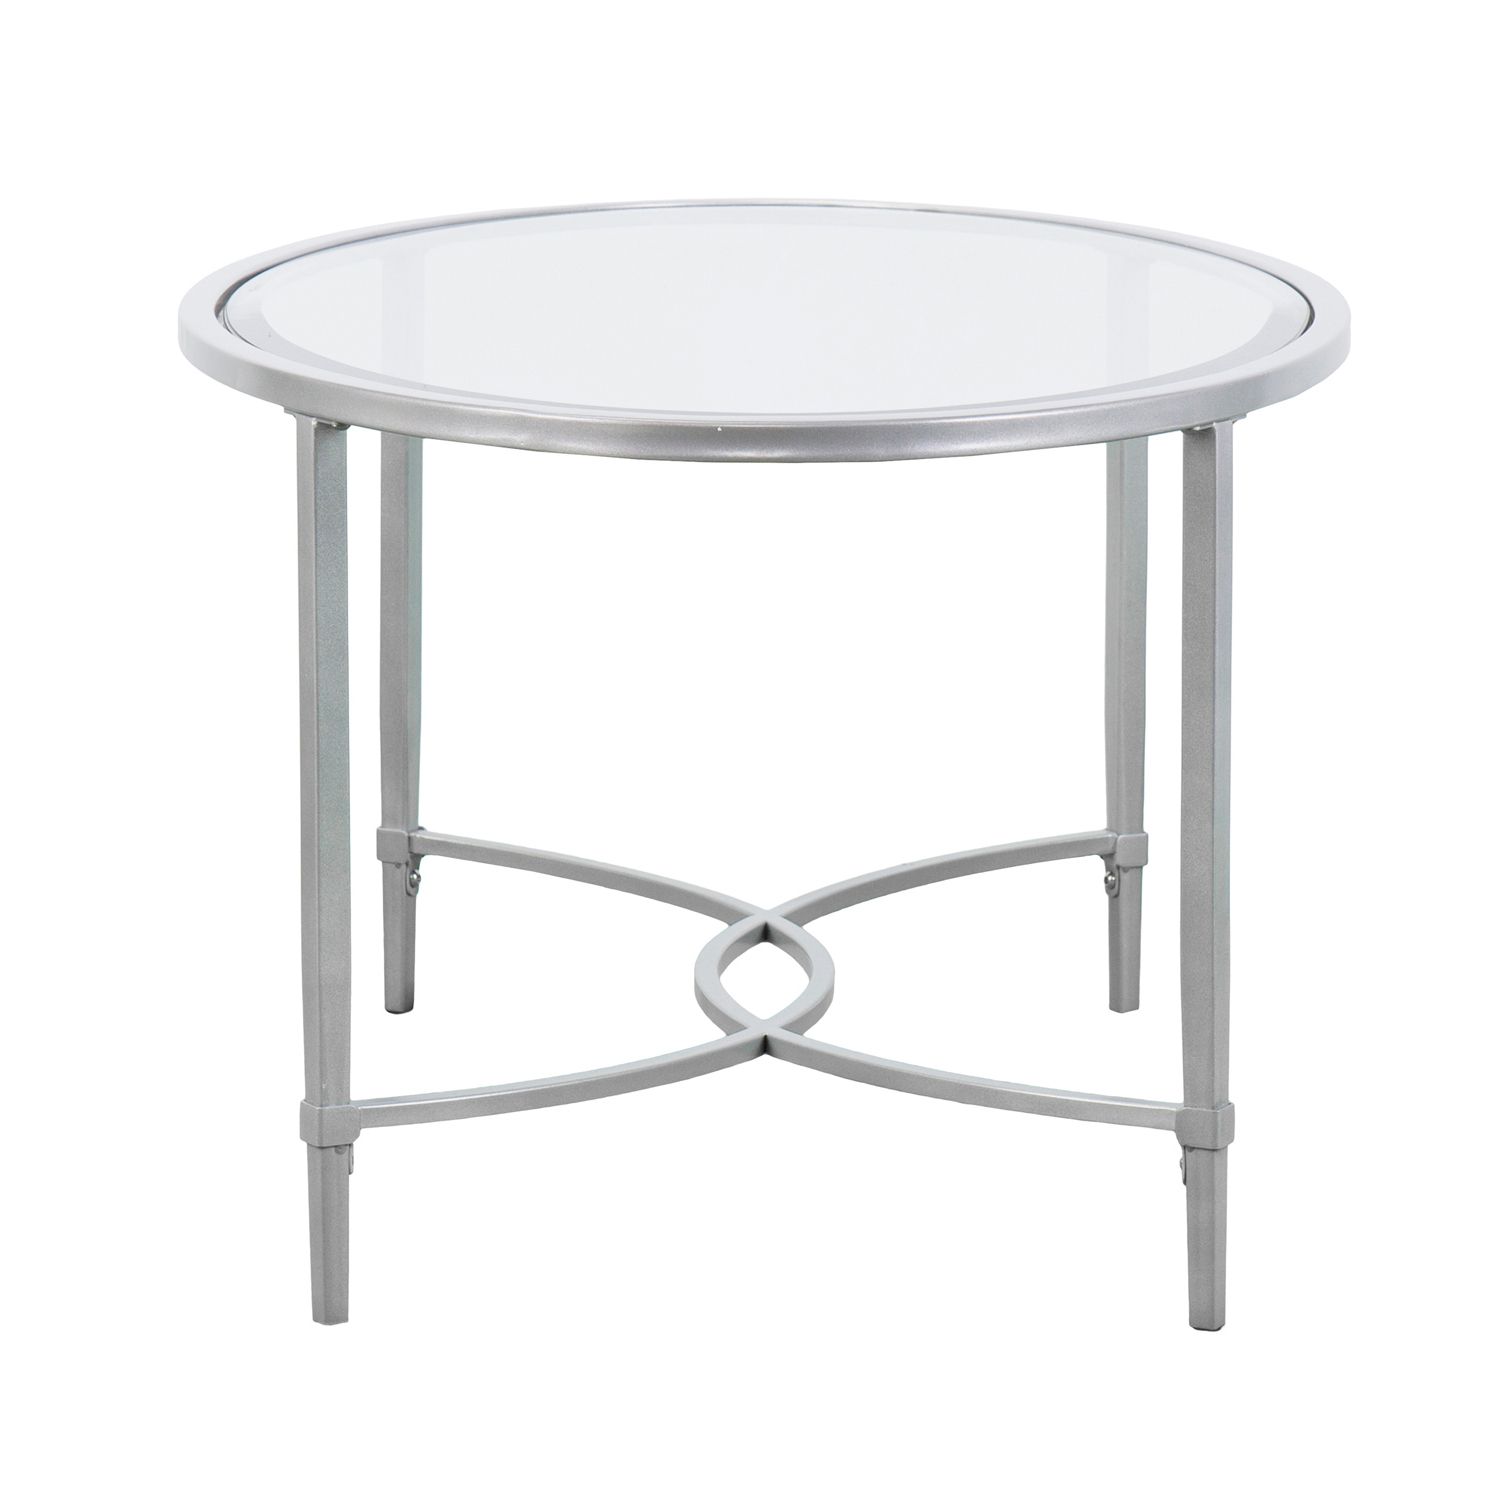 2020 Antique Silver Aluminum Coffee Tables In Hillcrest Silver Metal Oval Coffee Table – Pier1 (Gallery 1 of 20)